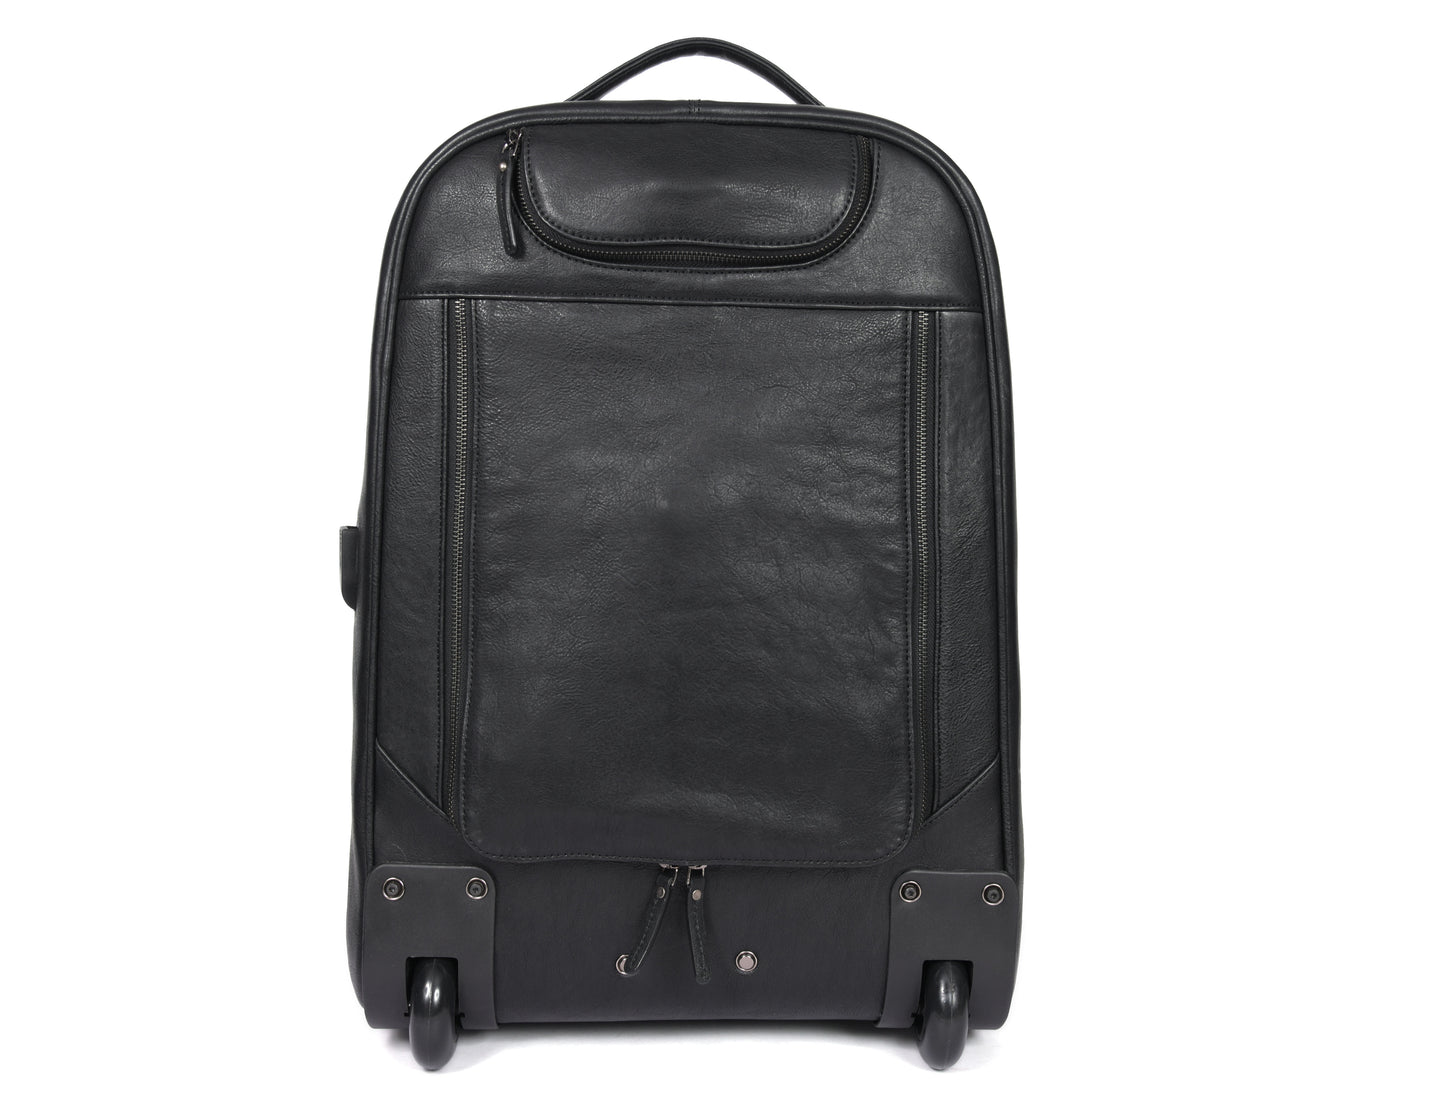 Atria Upcycled Leather Trolley Backpack - Black